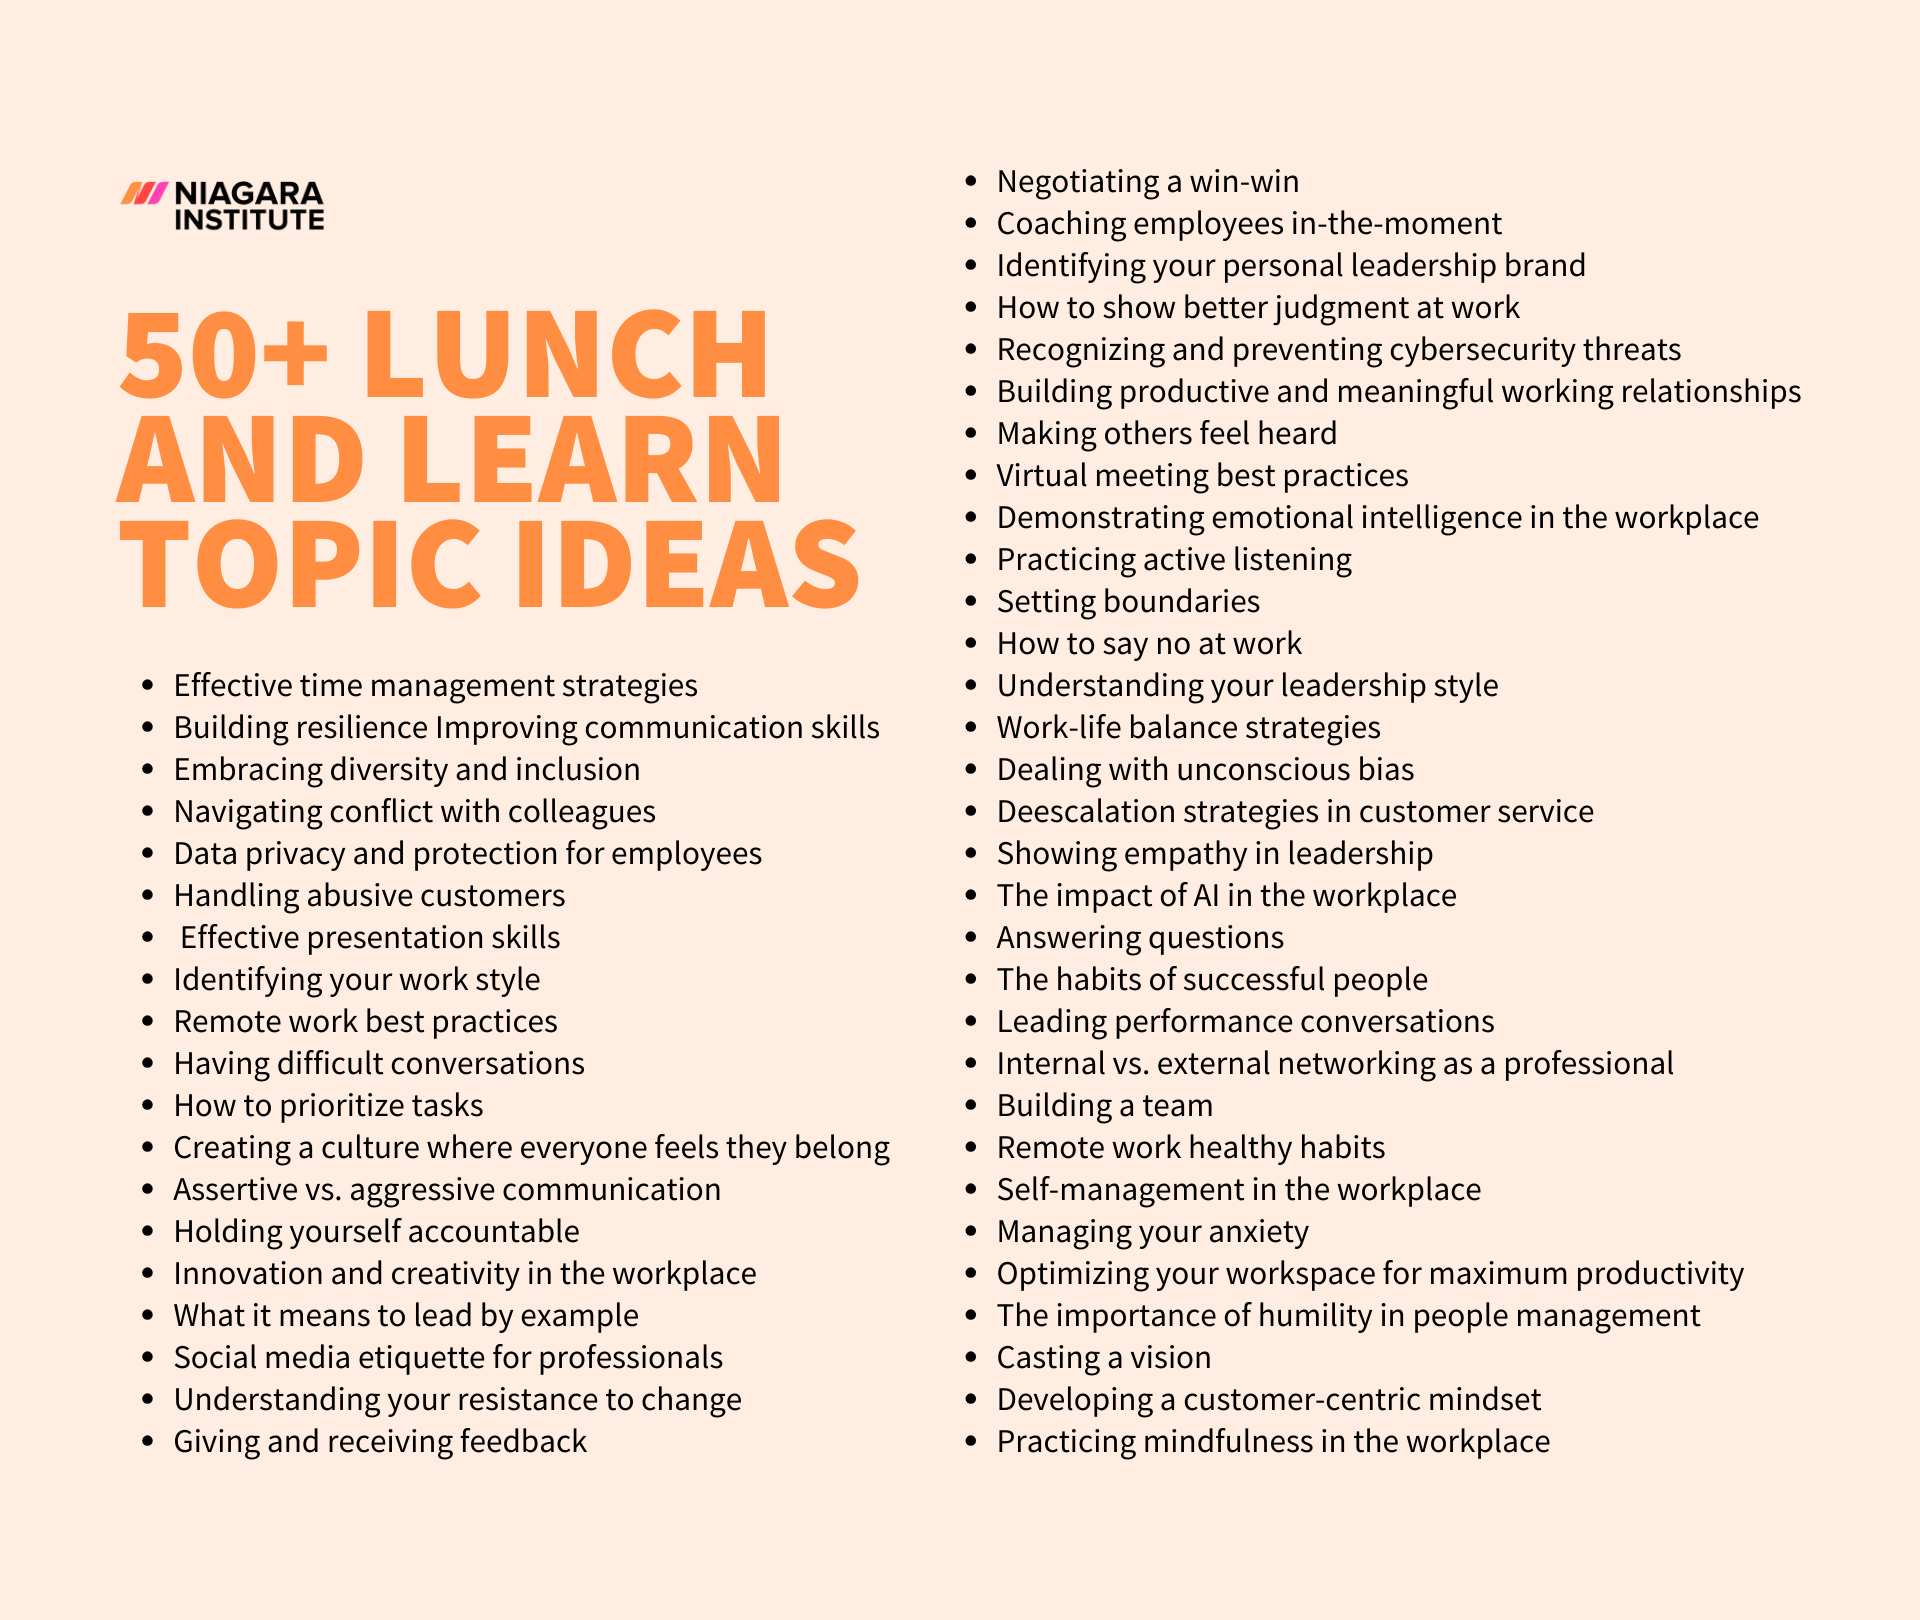 50+ Lunch and Learn Topic Ideas - Niagara Institute